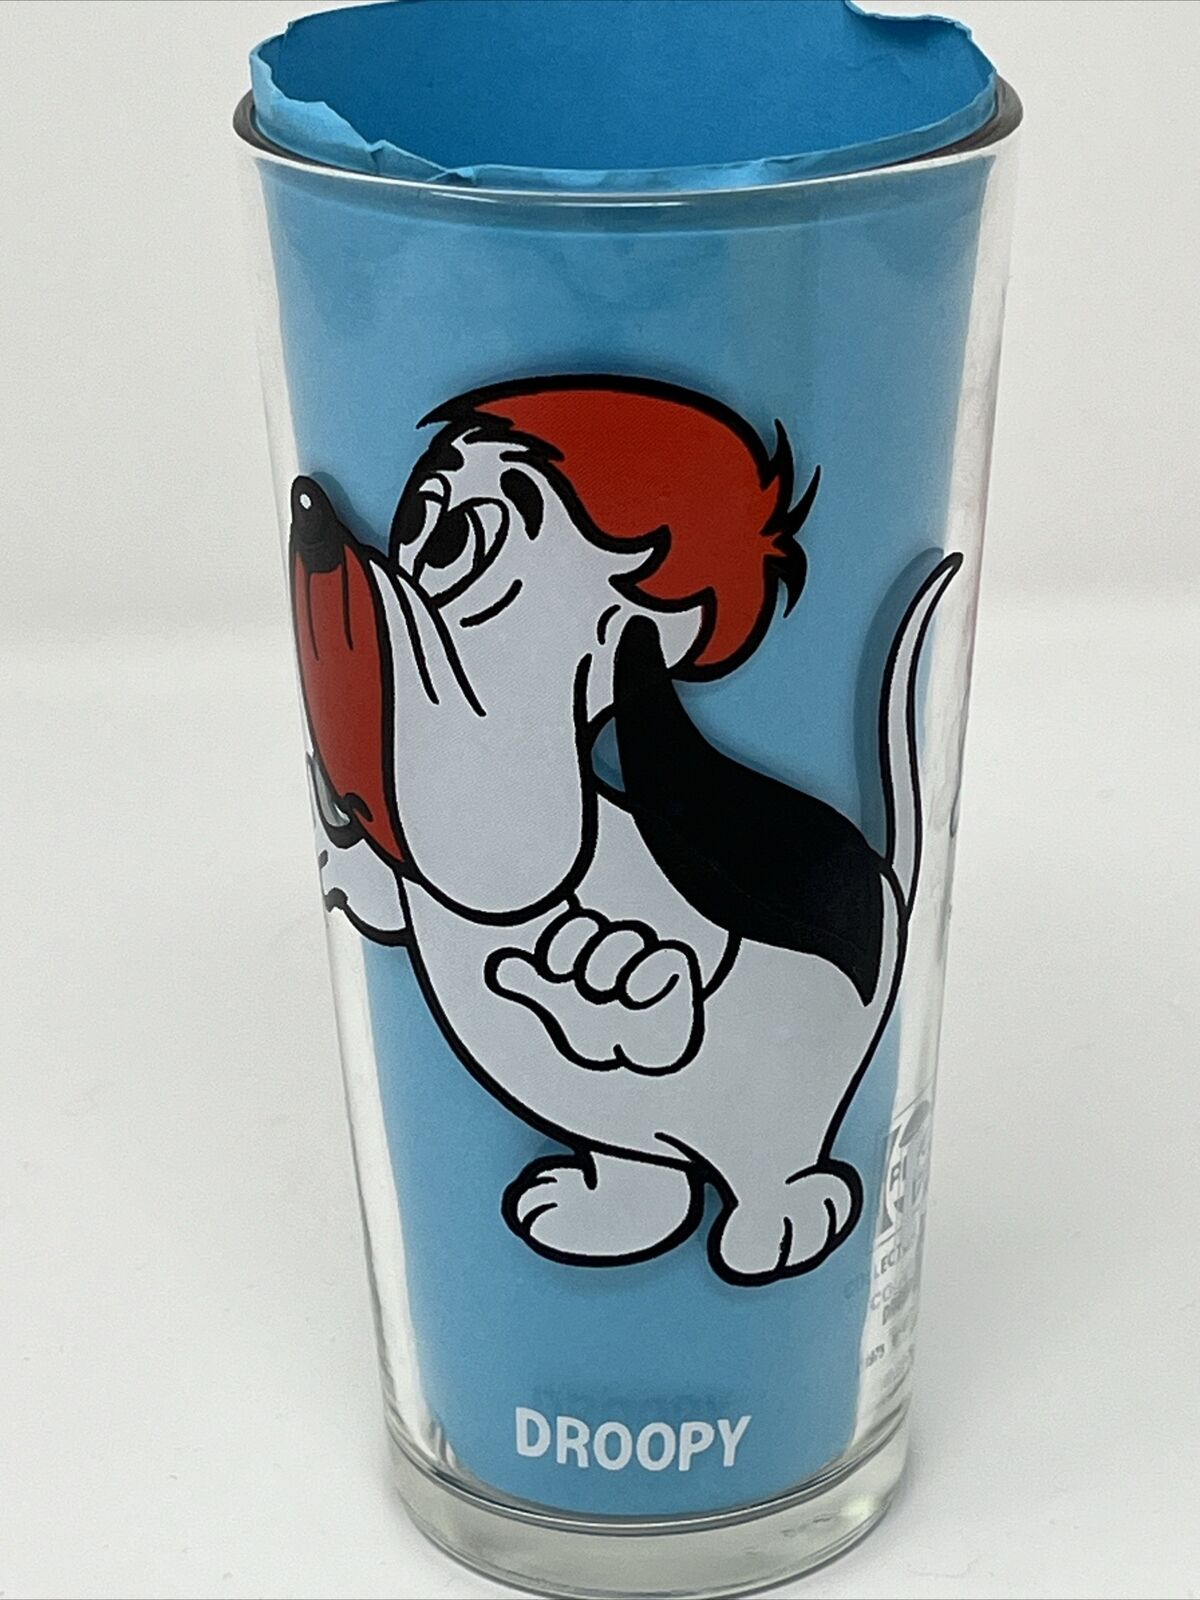 1975 Pepsi Collector Series DROOPY Drinking Glass 6 1/4”